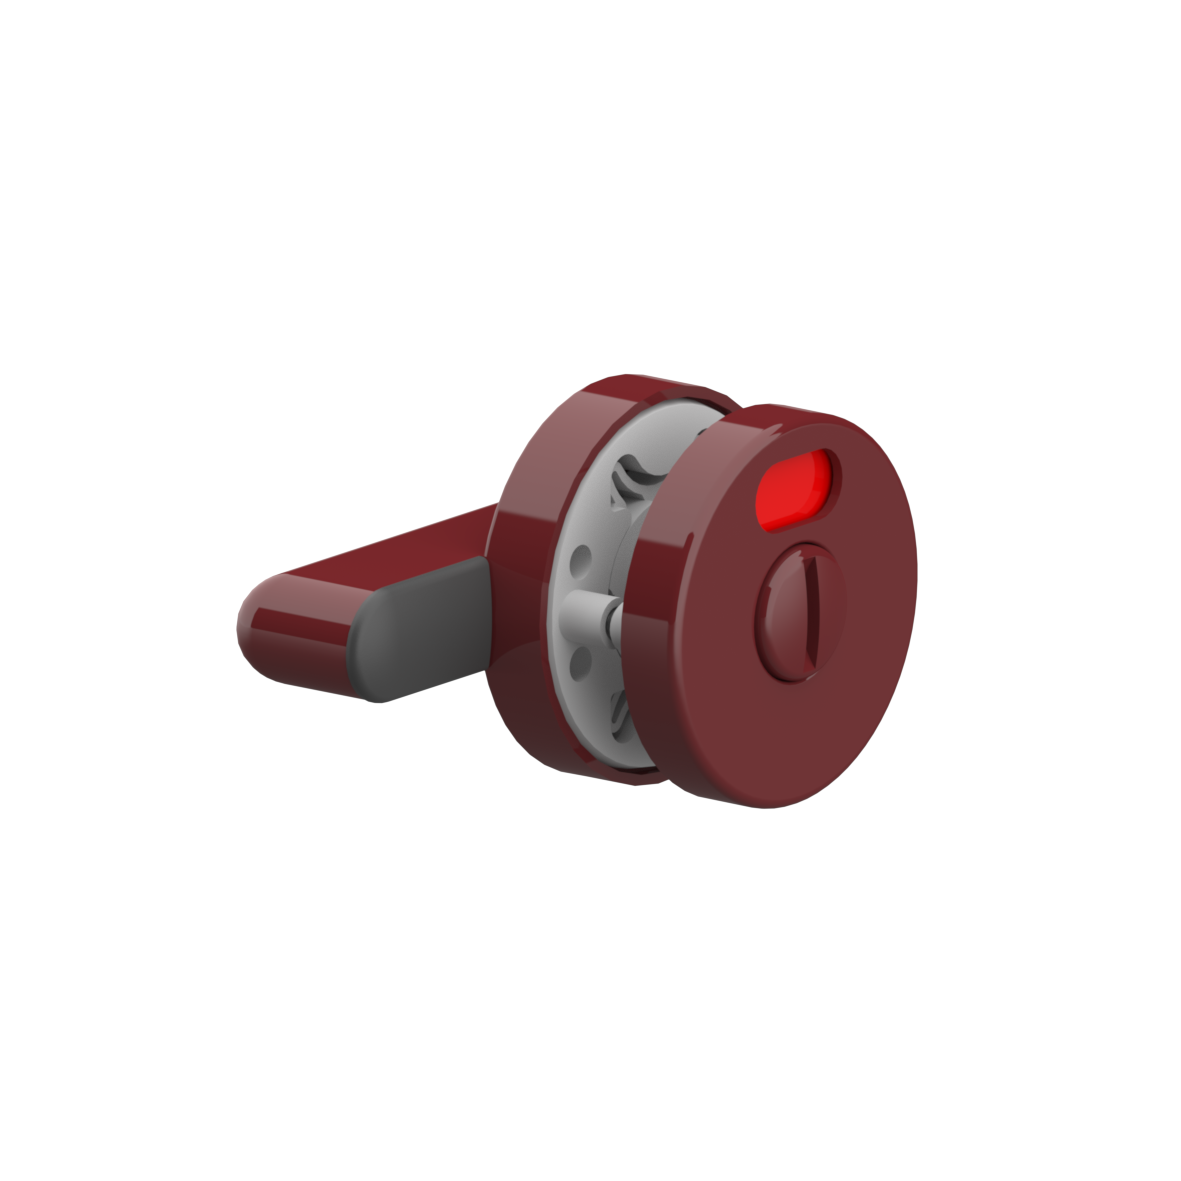 Nylon Partition Door Lock NY.TWR 84 NT, with stainless steel coin button, 80 x 75 x 52 mm, Dark red